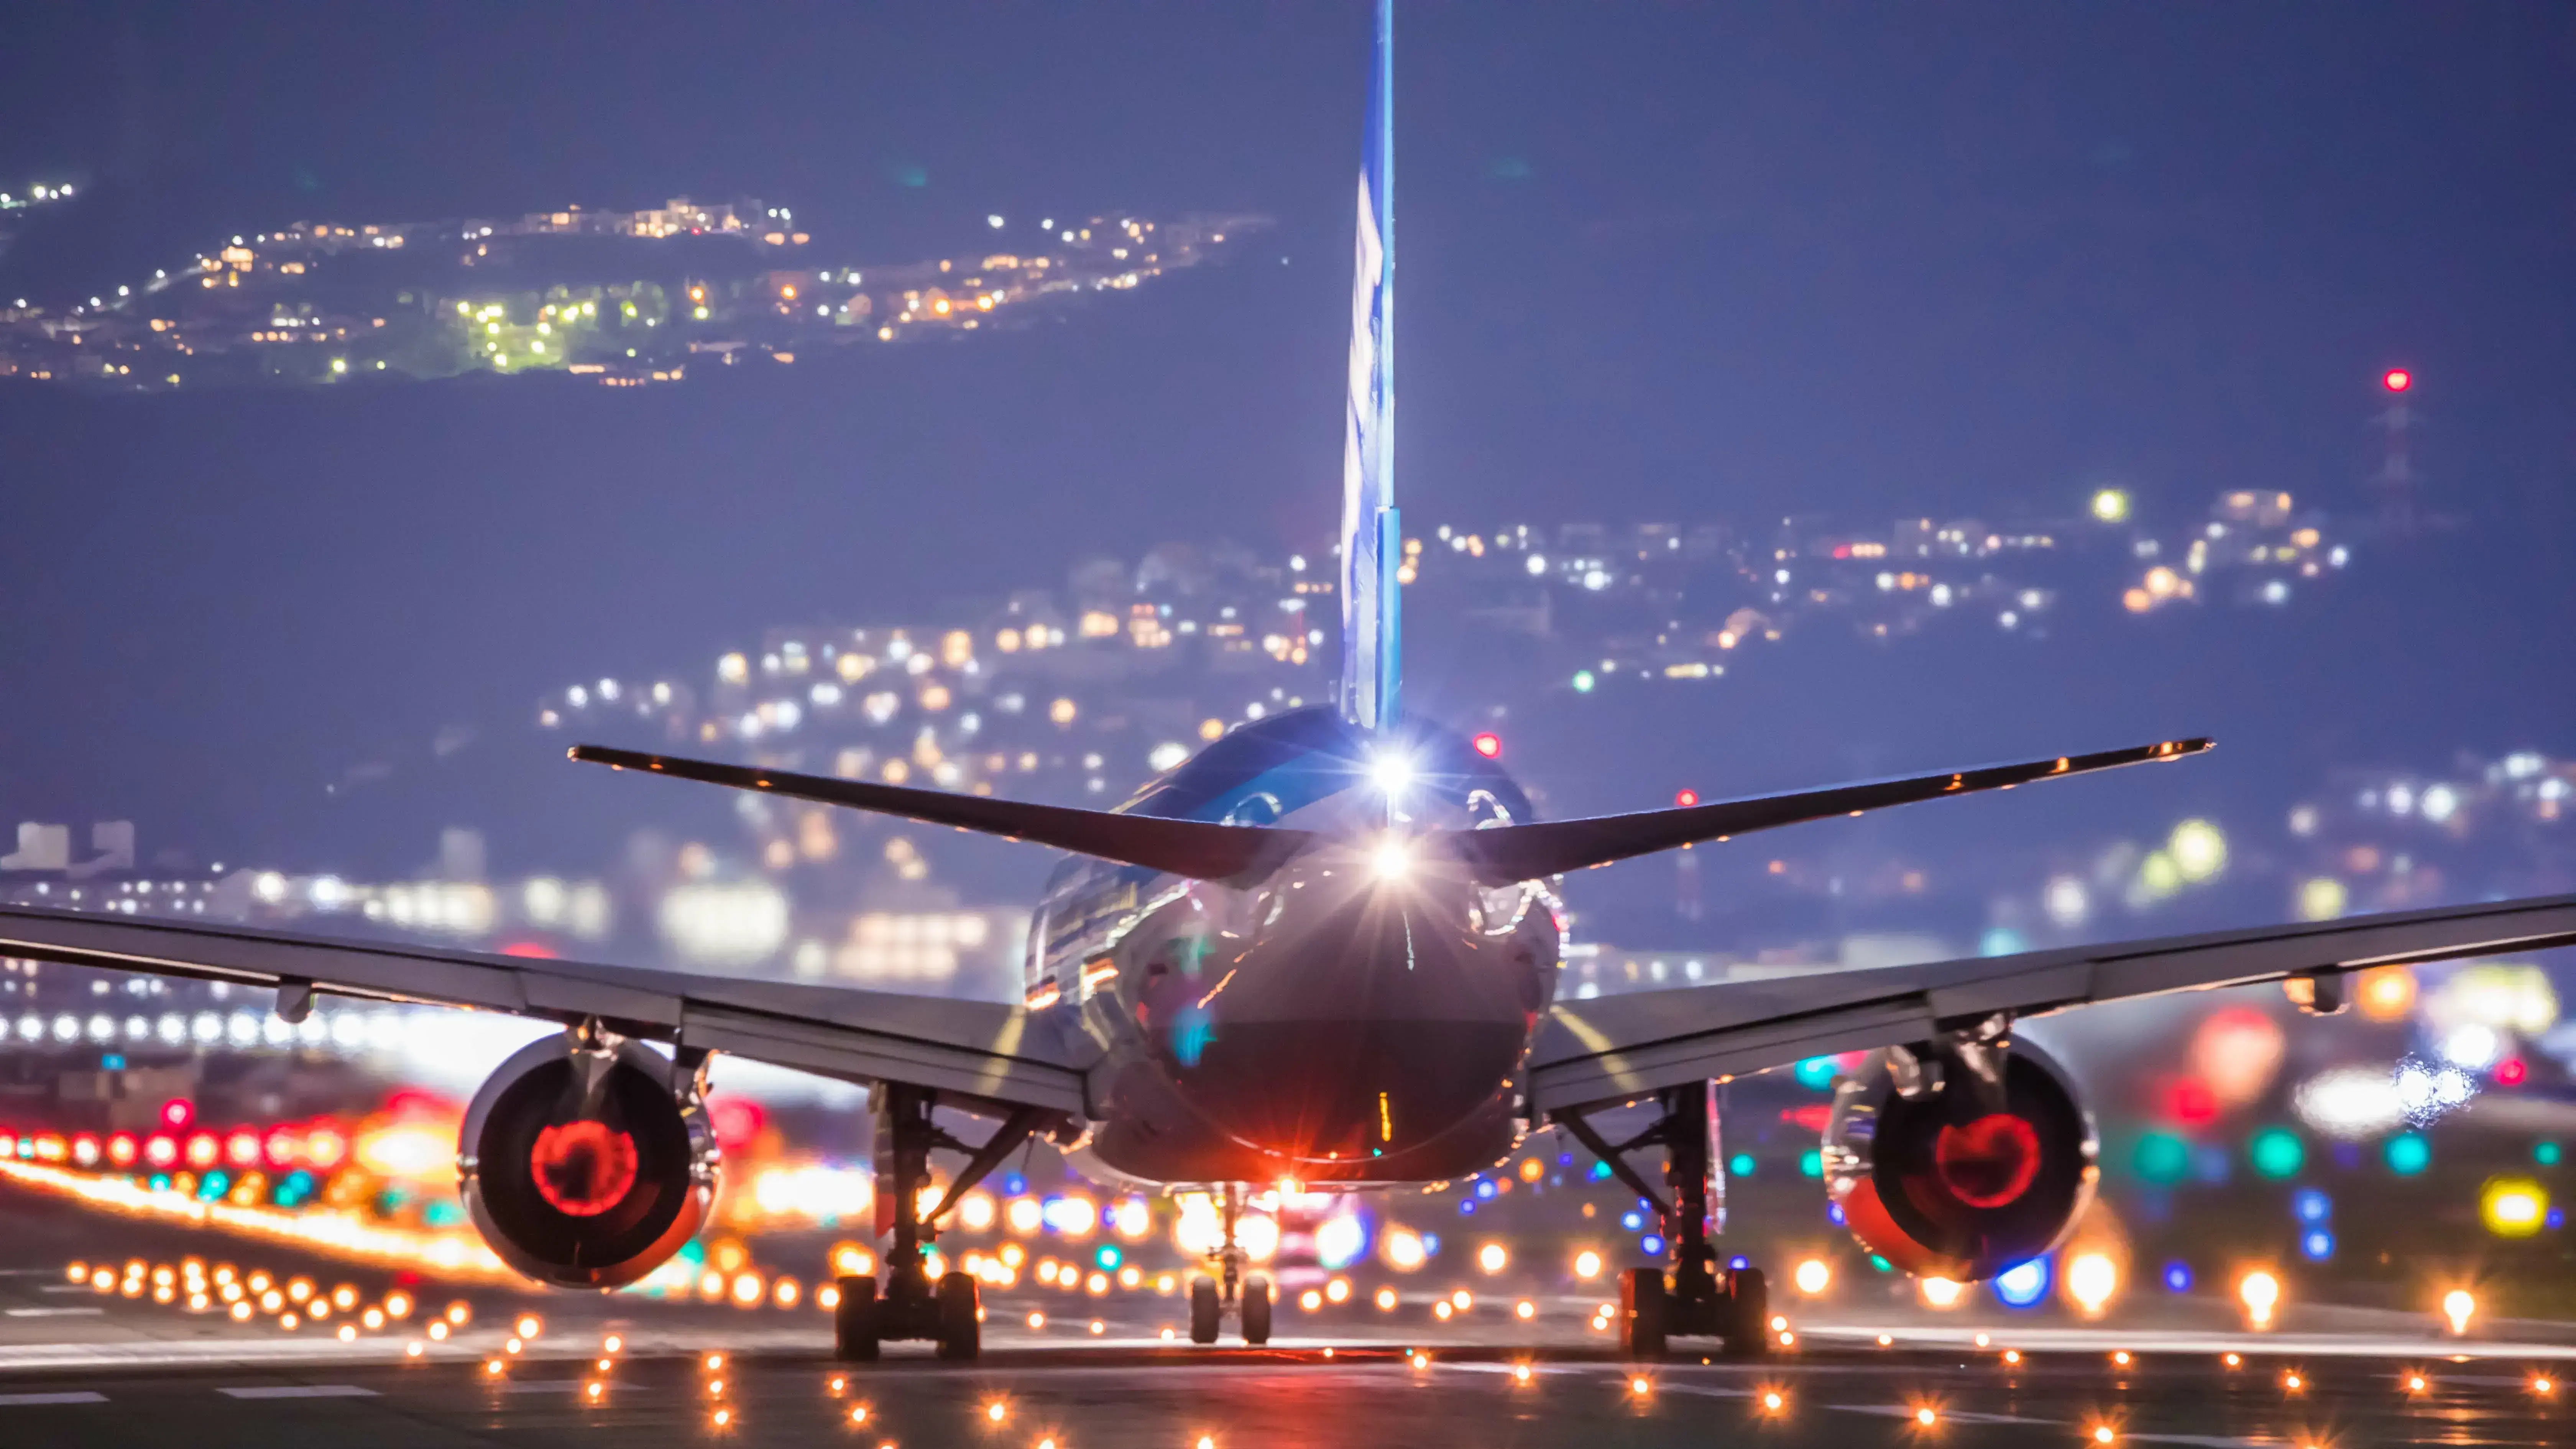 An aircraft on a runway, shown from behind against coloured lights, ready for takeoff